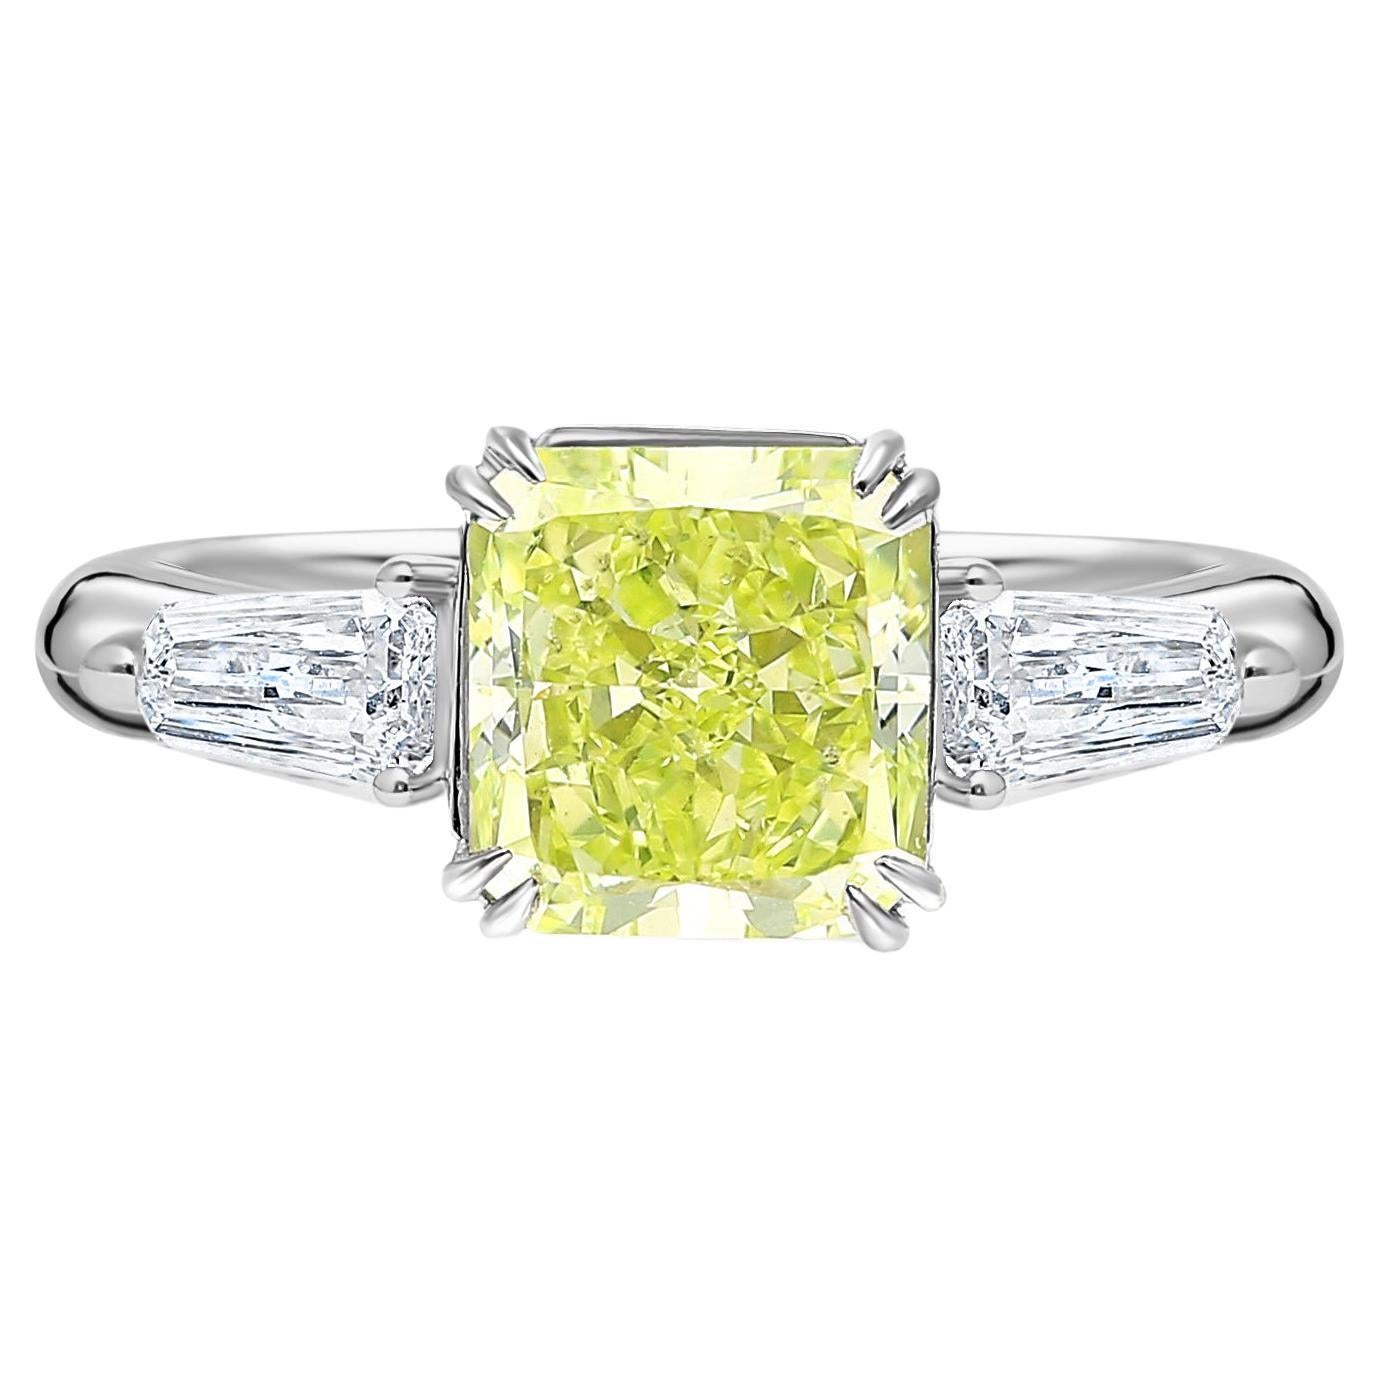 GIA Certified 2.22 Carat Fancy Yellow-Green Radiant Cut Diamond 3 Stone Ring For Sale